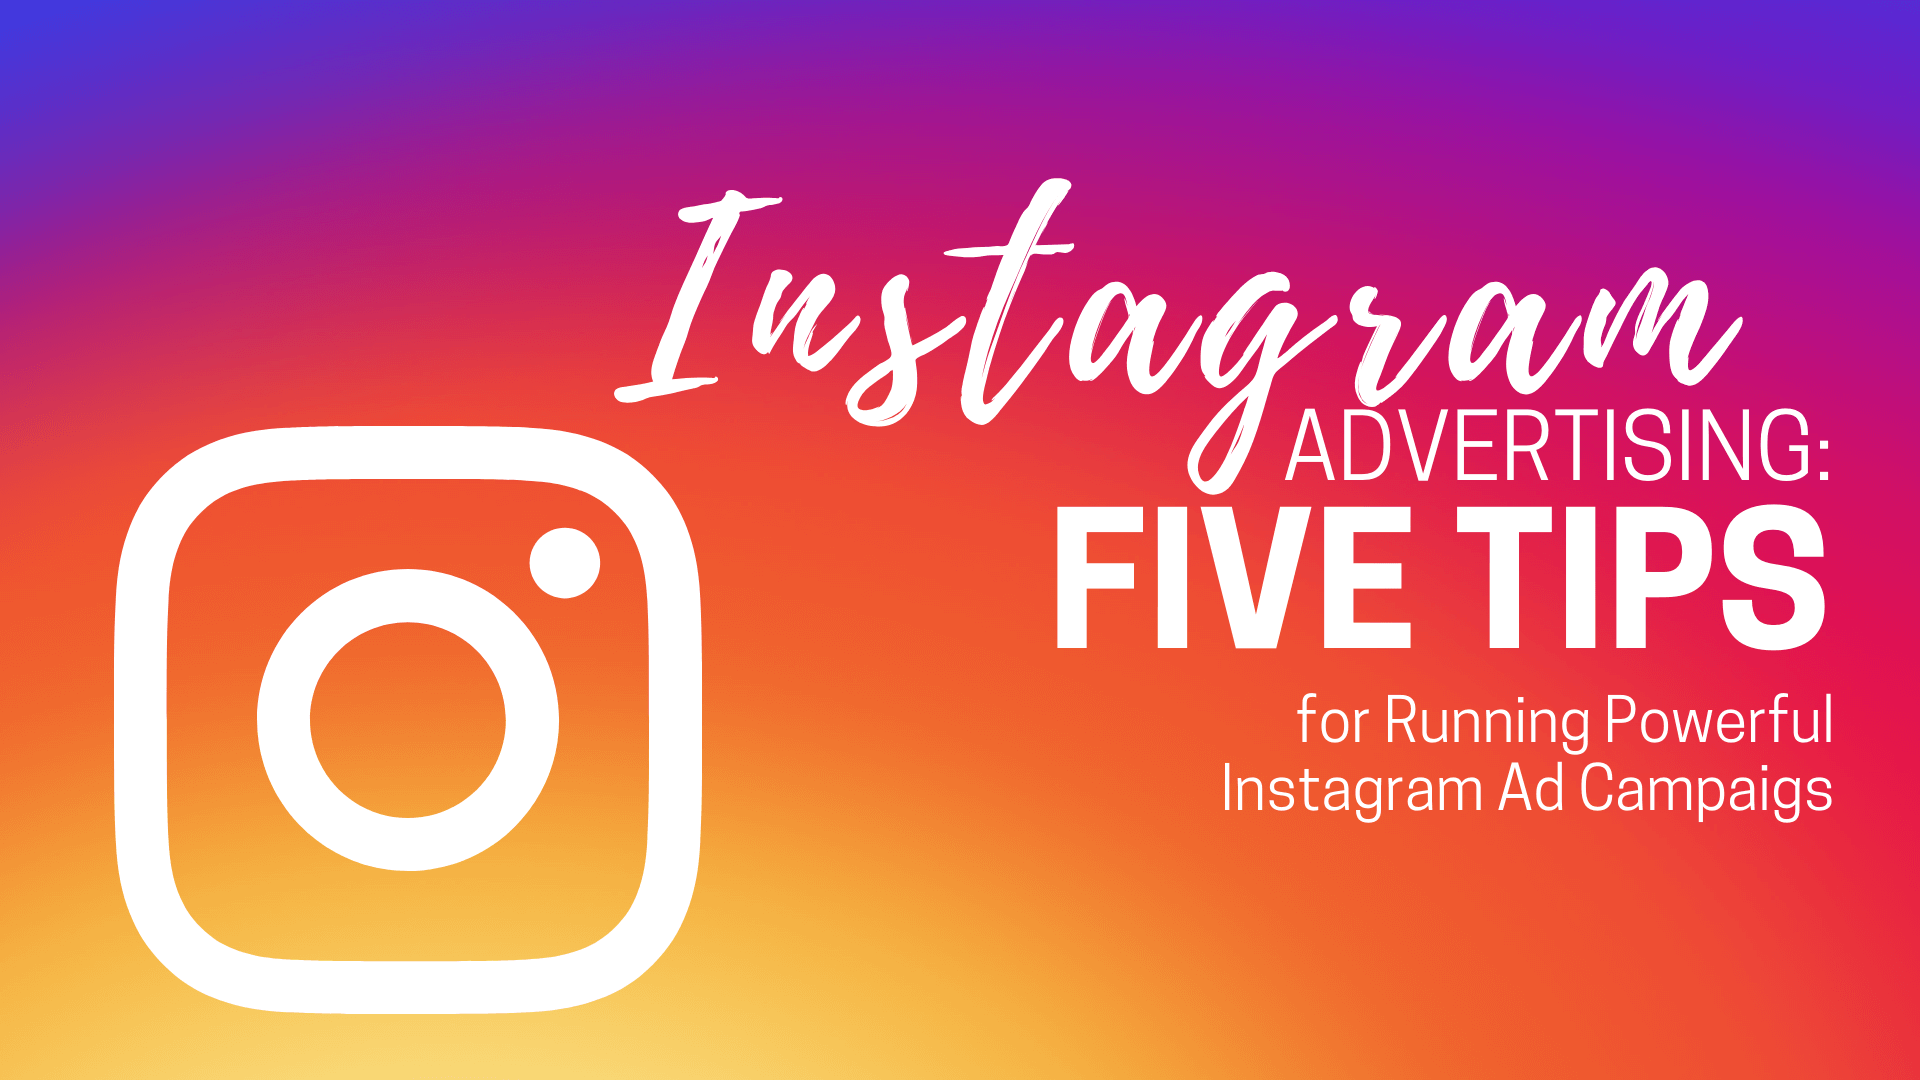 Instagram Advertising: 5 Tips for Running Powerful Instagram Ad Campaigns